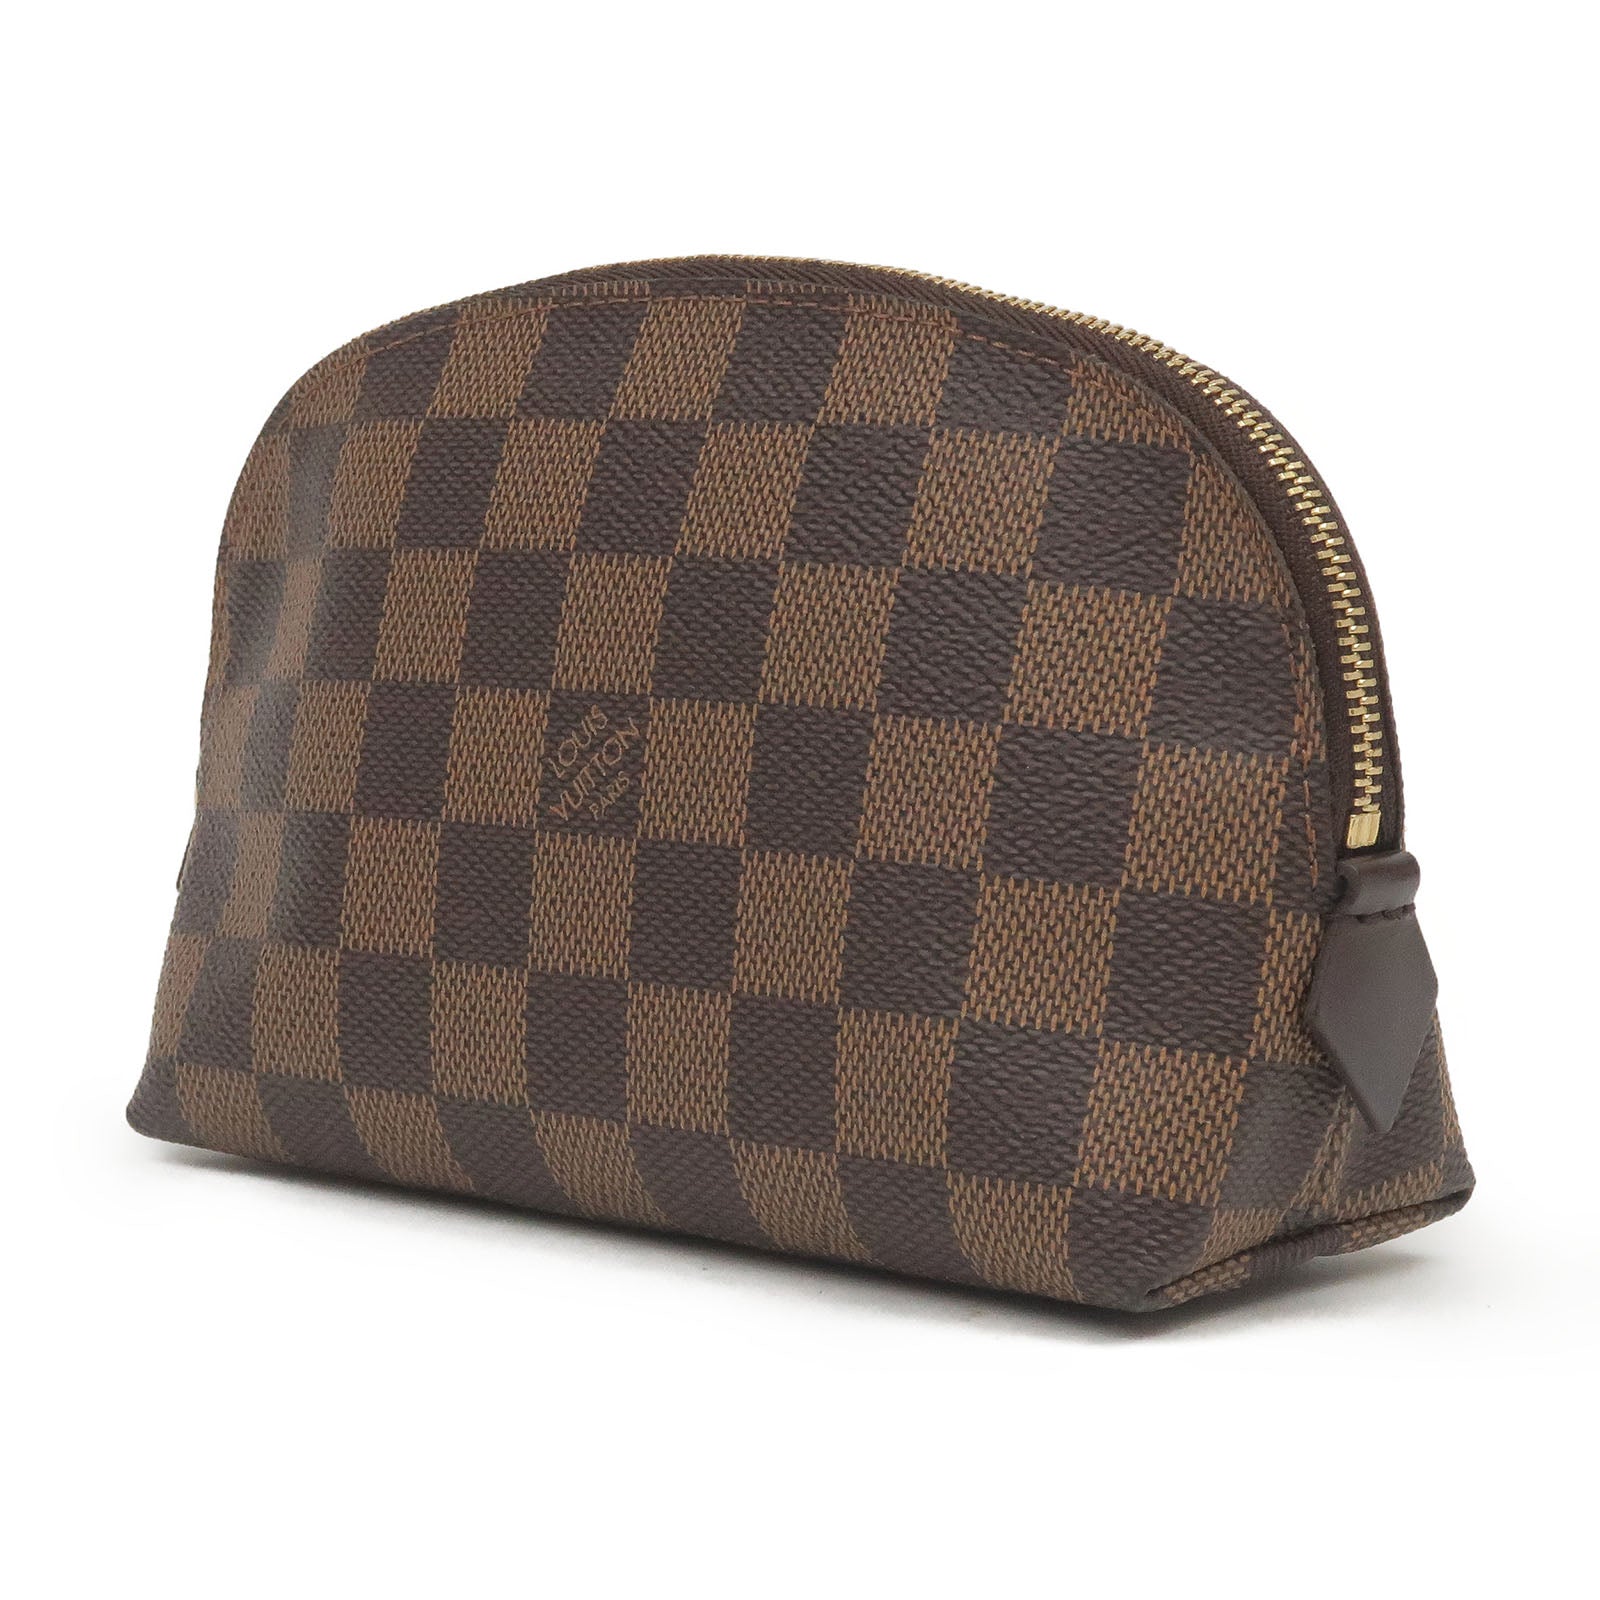 We Review The Louis Vuitton Toiletry Pouch in Damier Graphite! 